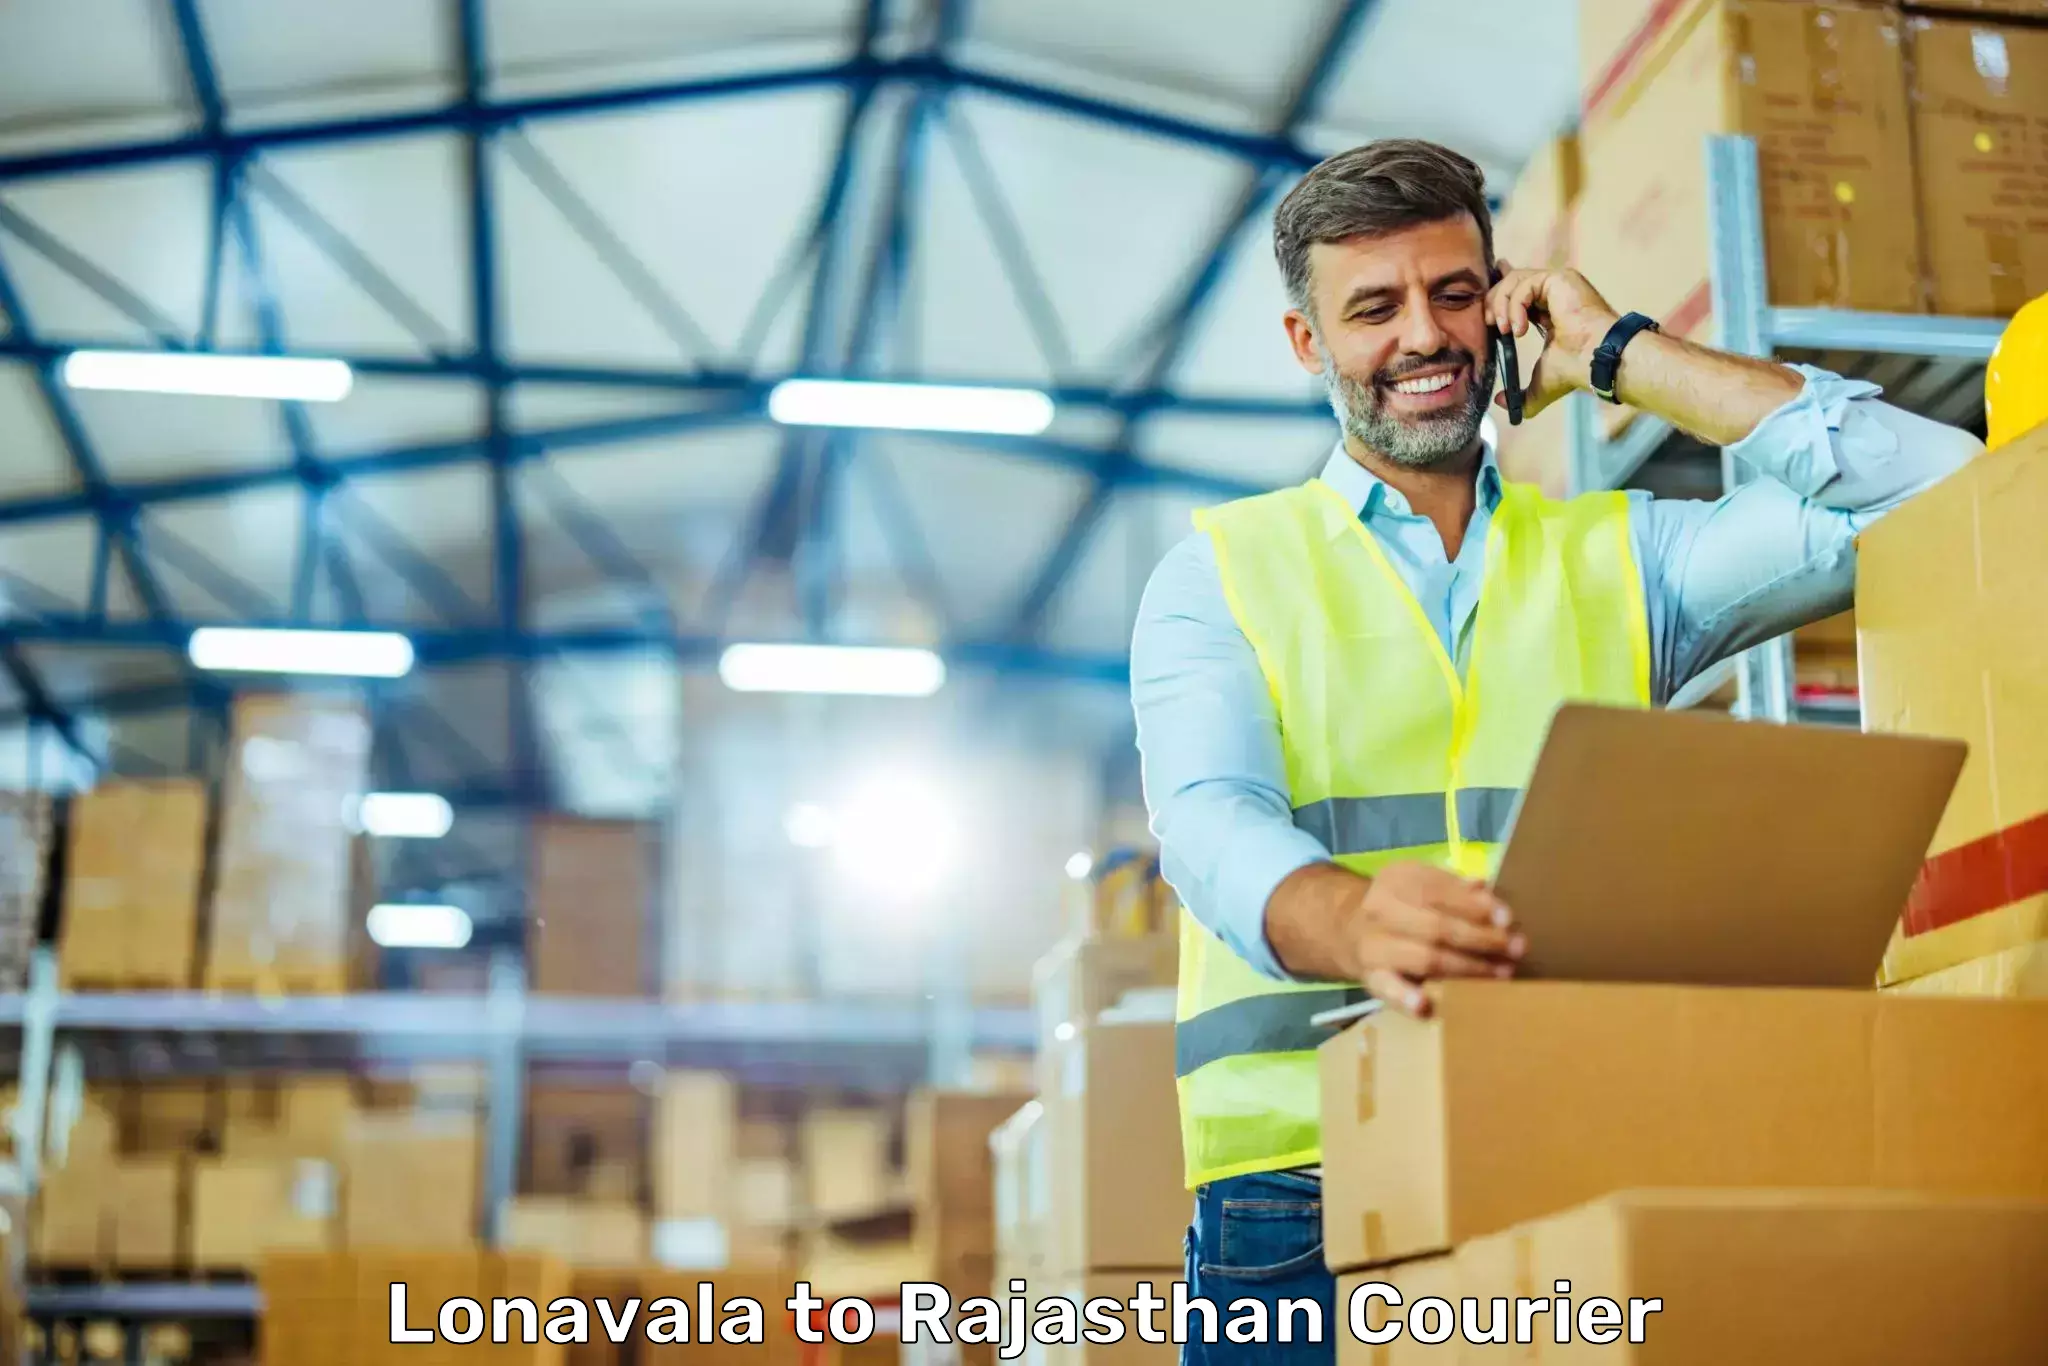 Business delivery service Lonavala to Rajasthan